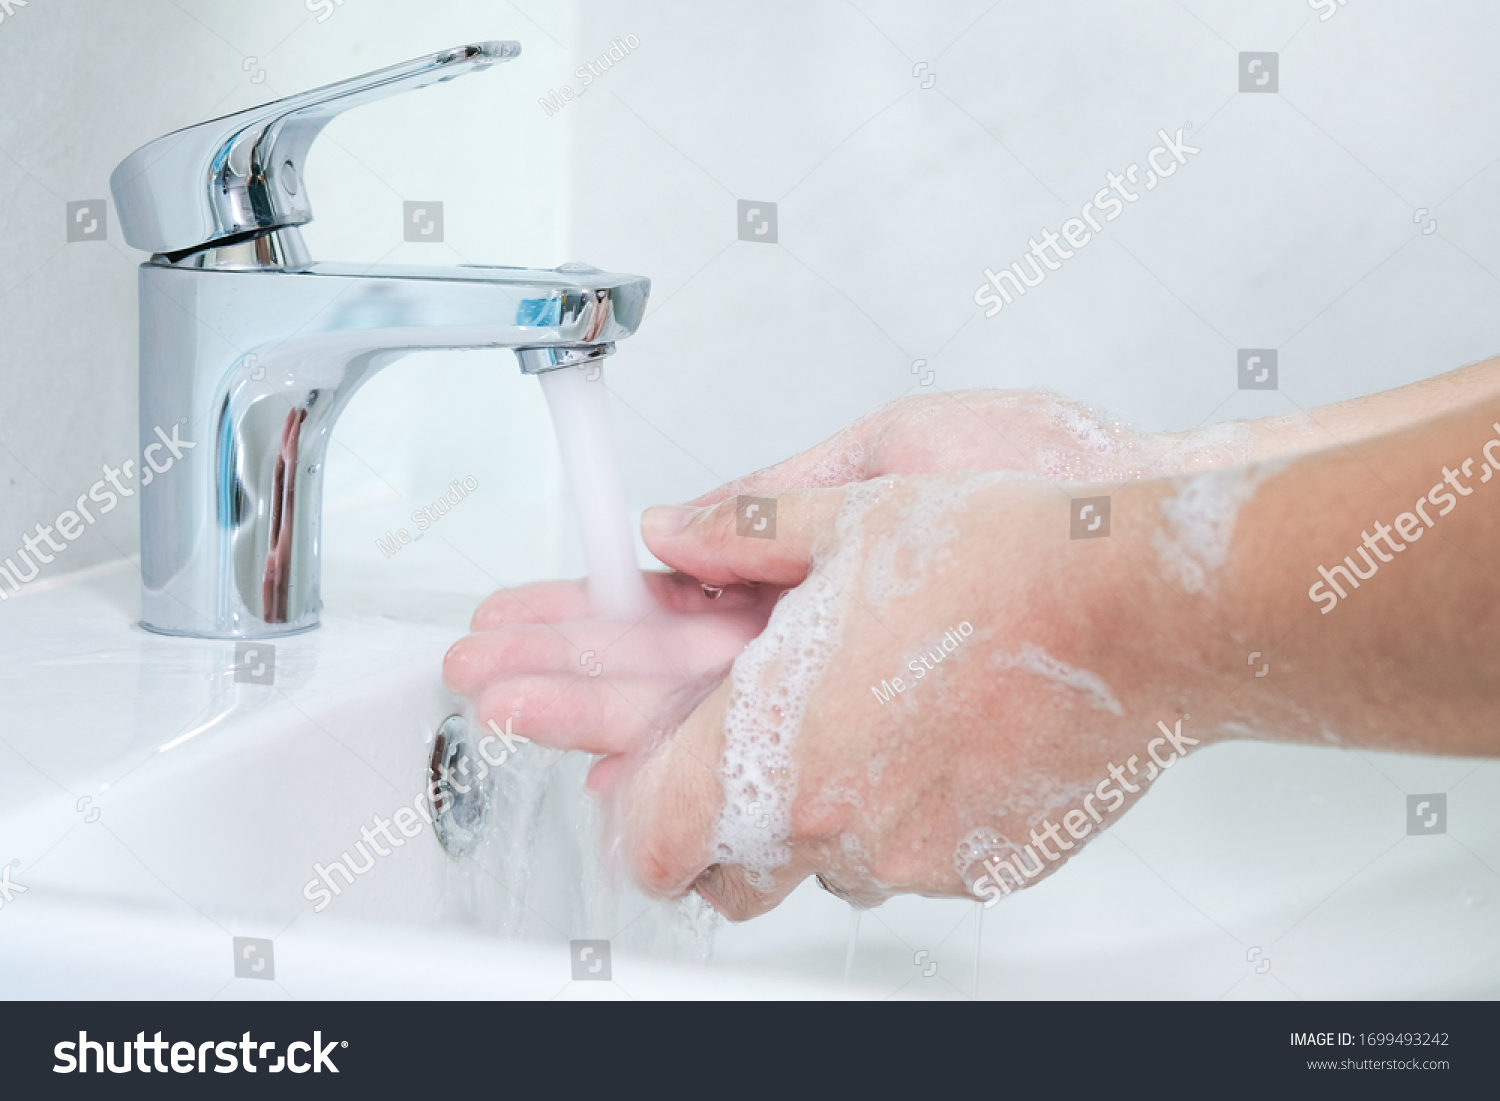 washing hands with soap sanitizer. wash movement.   #1699493242